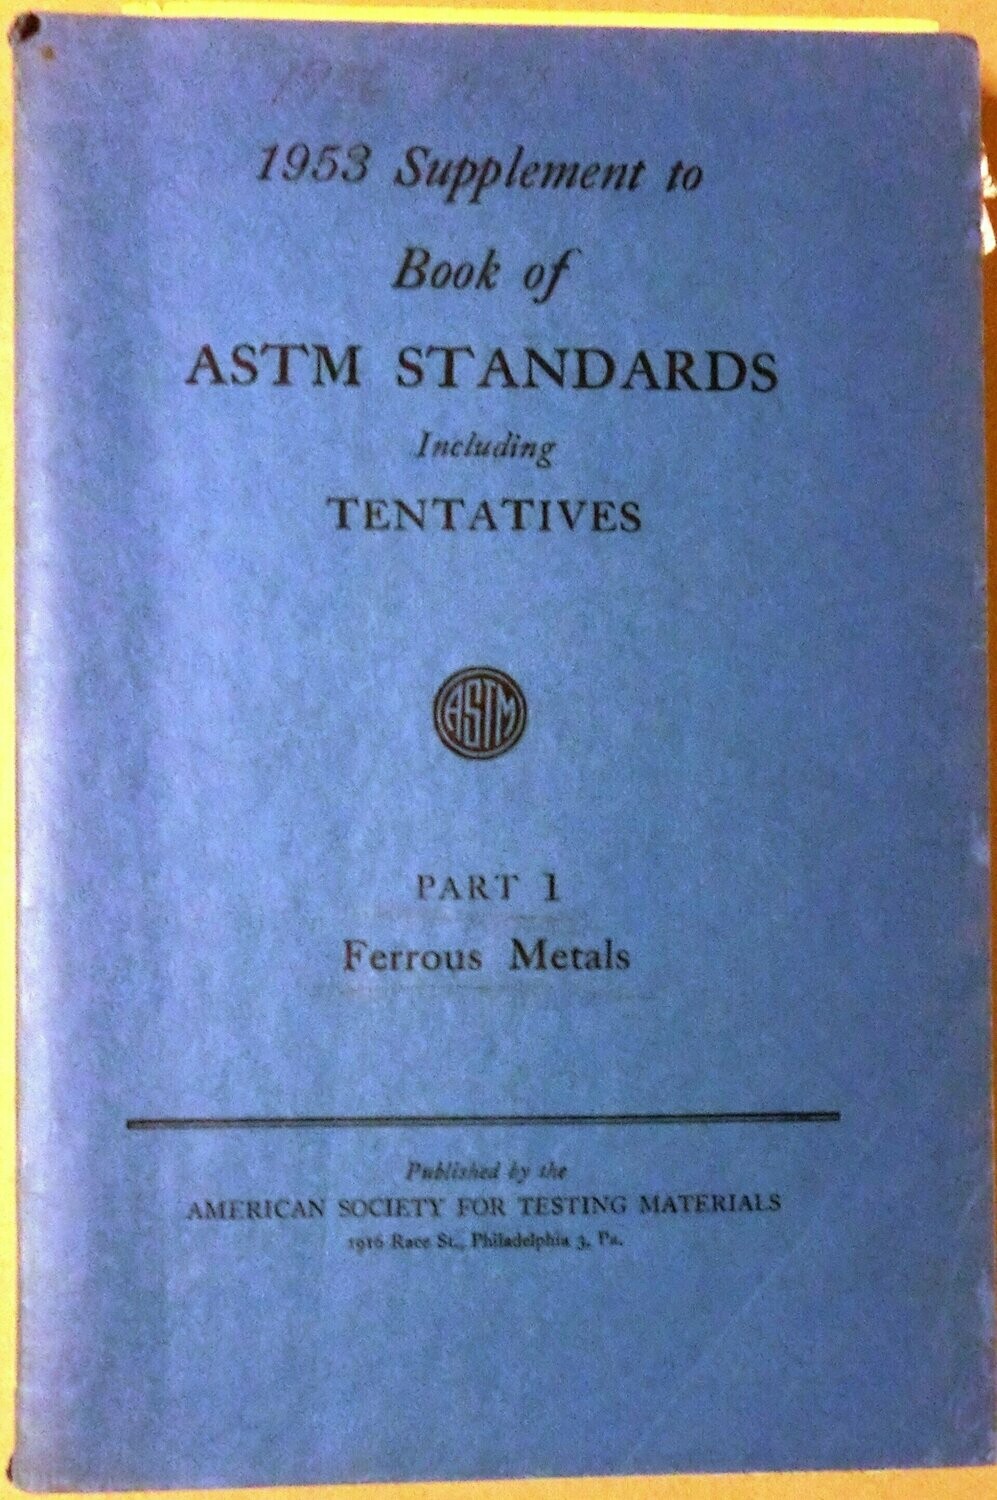 1953 Supplement to Book of astm standards Including tentatives part 1 Ferrous Metals